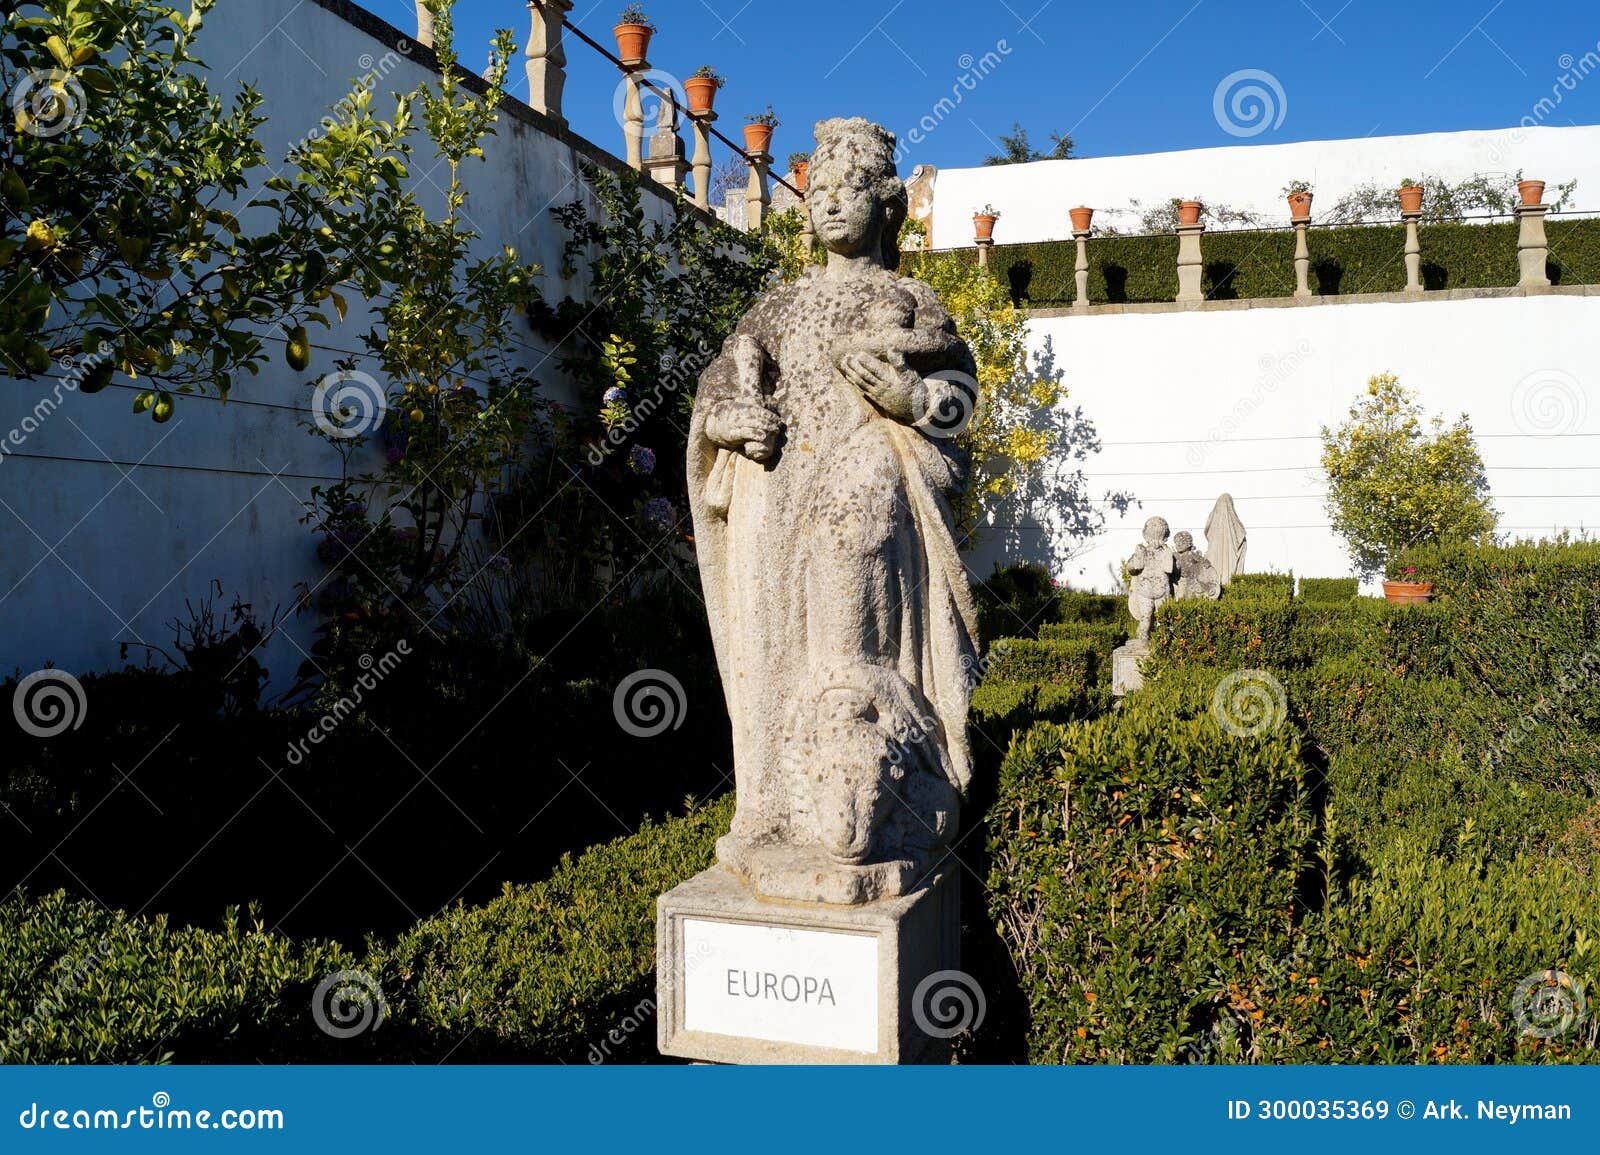 europe, allegoric sculpture in the garden of the episcopal palace, jardim do paco, castelo branco, portugal